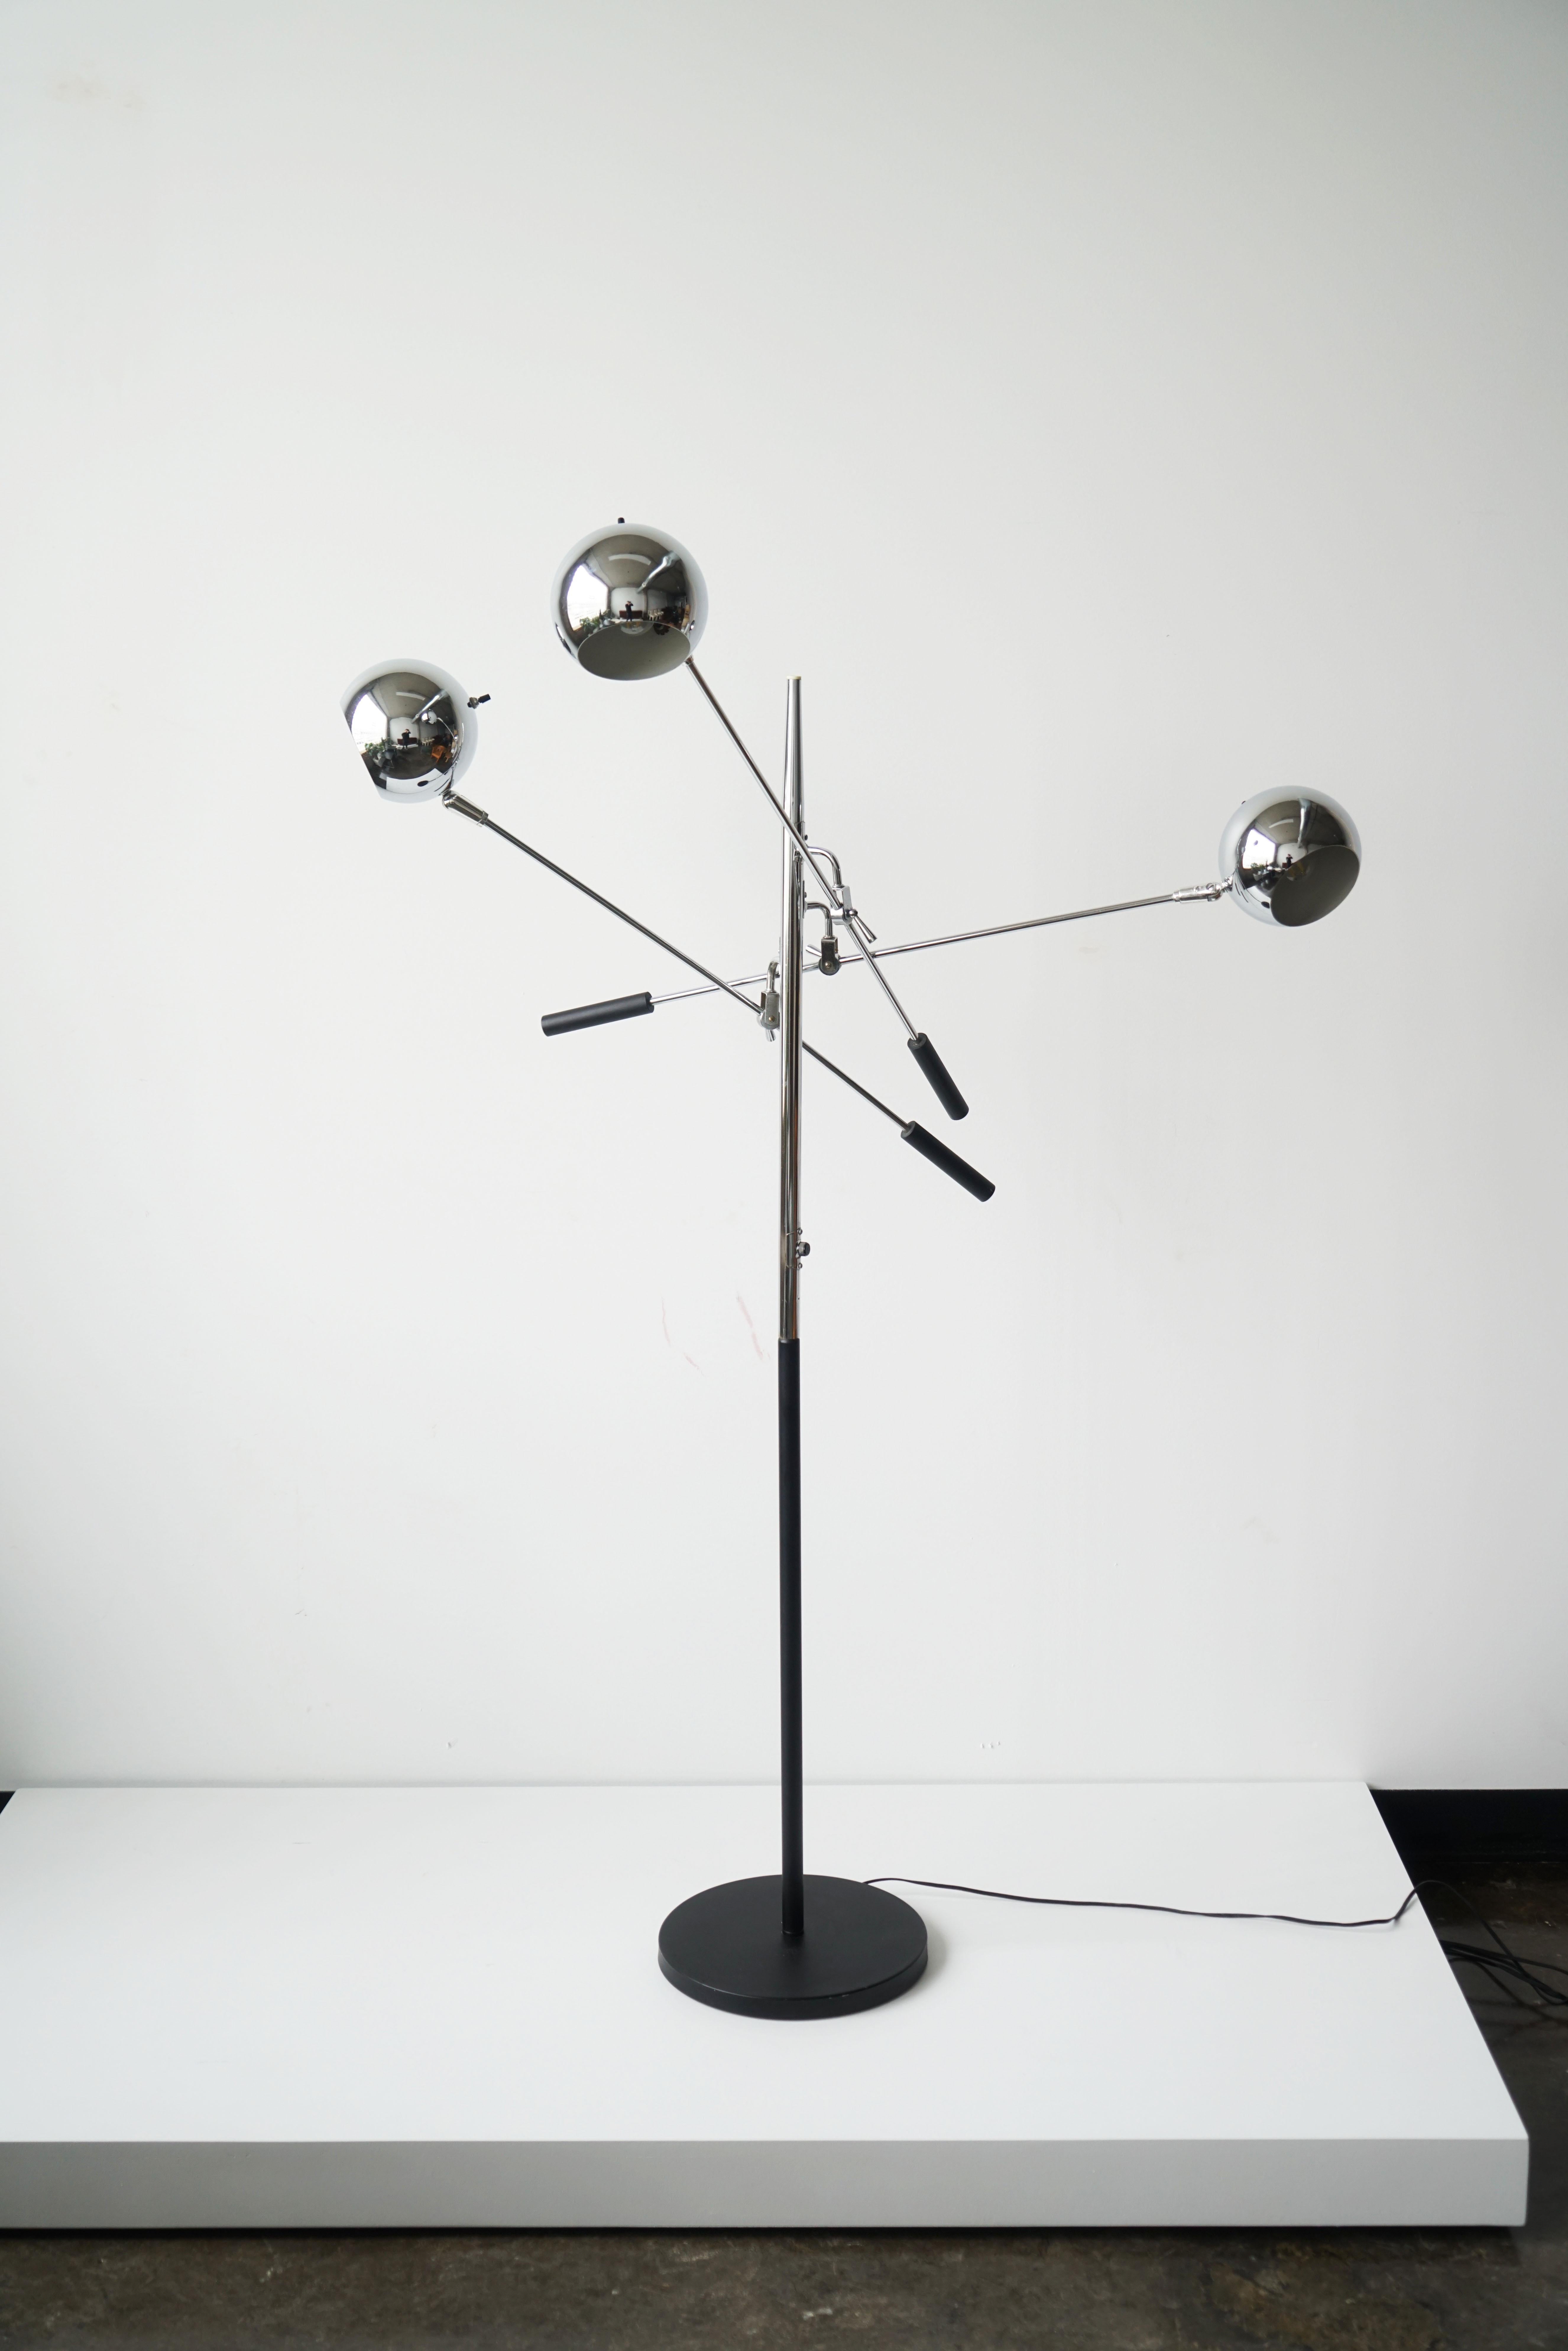 Vintage 3-arm floor lamp designed by Robert Sonneman.
circa 1970s. 

This lamp features three adjustable chrome orb light heads that pivot on balancing lever arms. A true classic and well-made lamp. 

Tested and in great working condition.